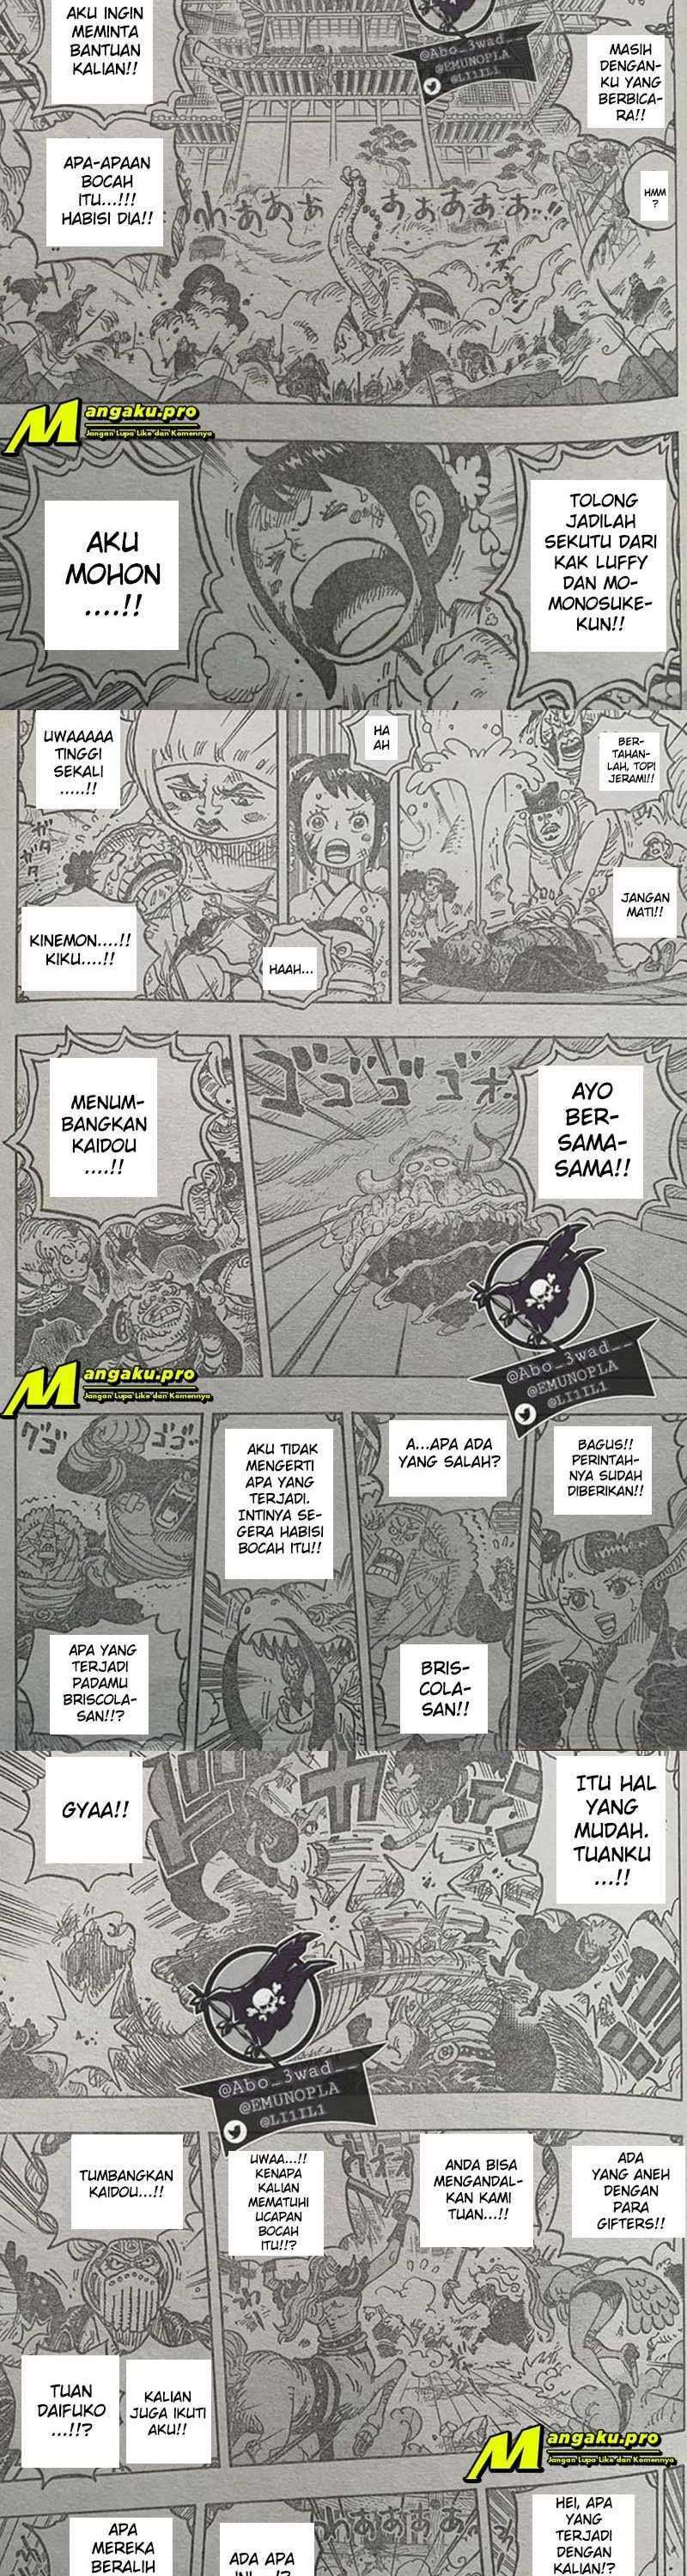 One Piece Chapter 1017 Lq - 53